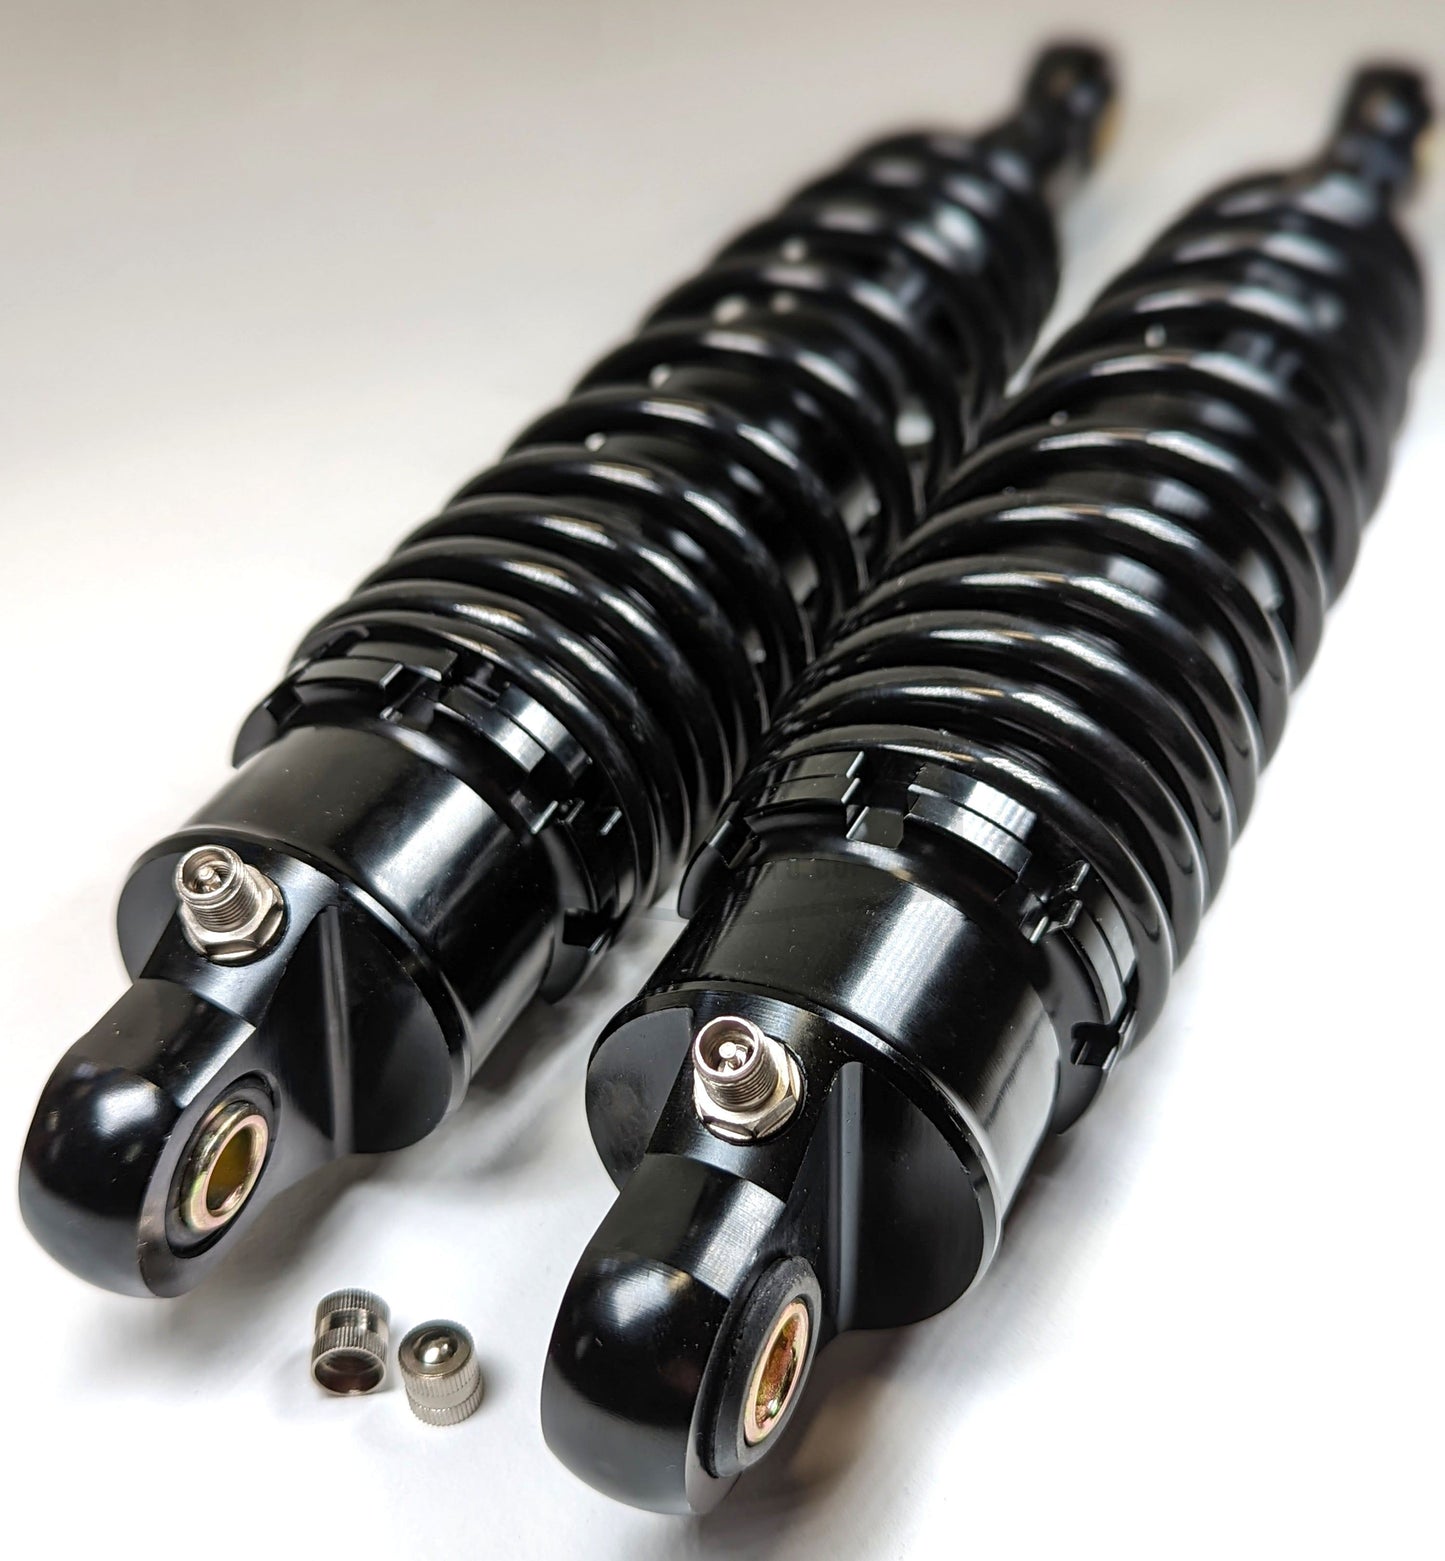 CT70 330MM Performance Gas Filled Rear Shock Set - All Black